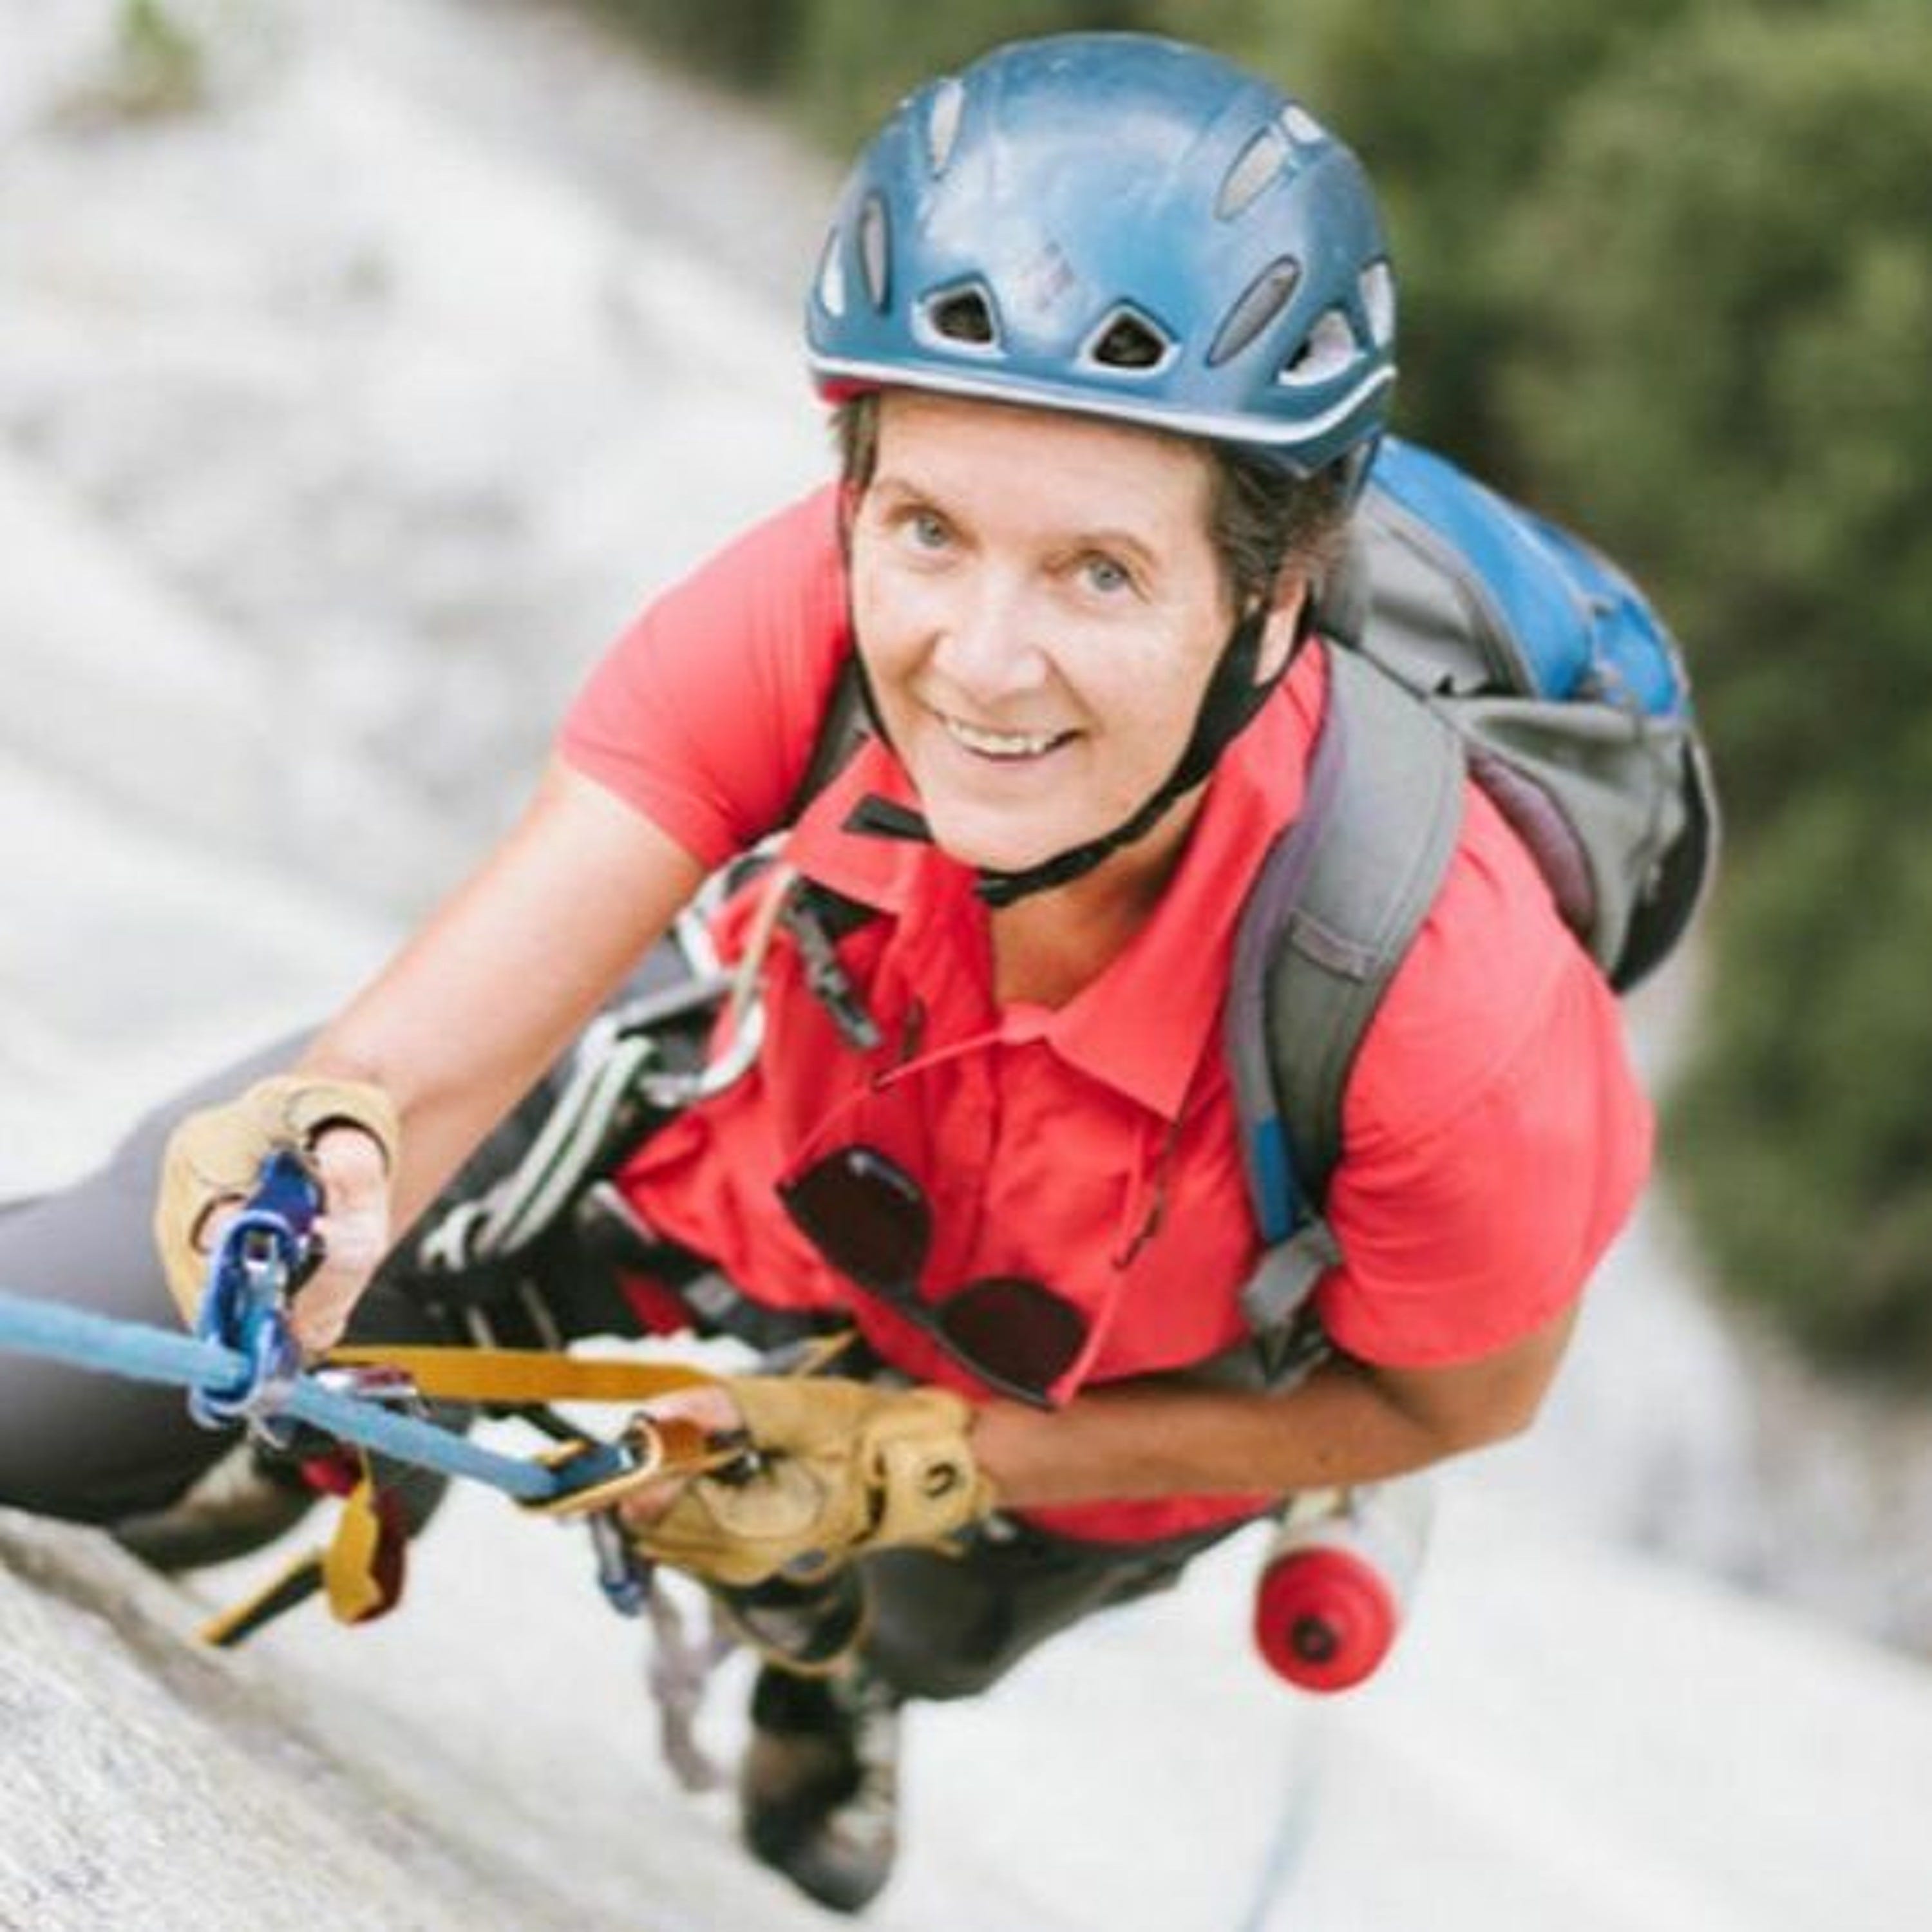 Dierdre Wolownick is much more than Alex Honnold's mom